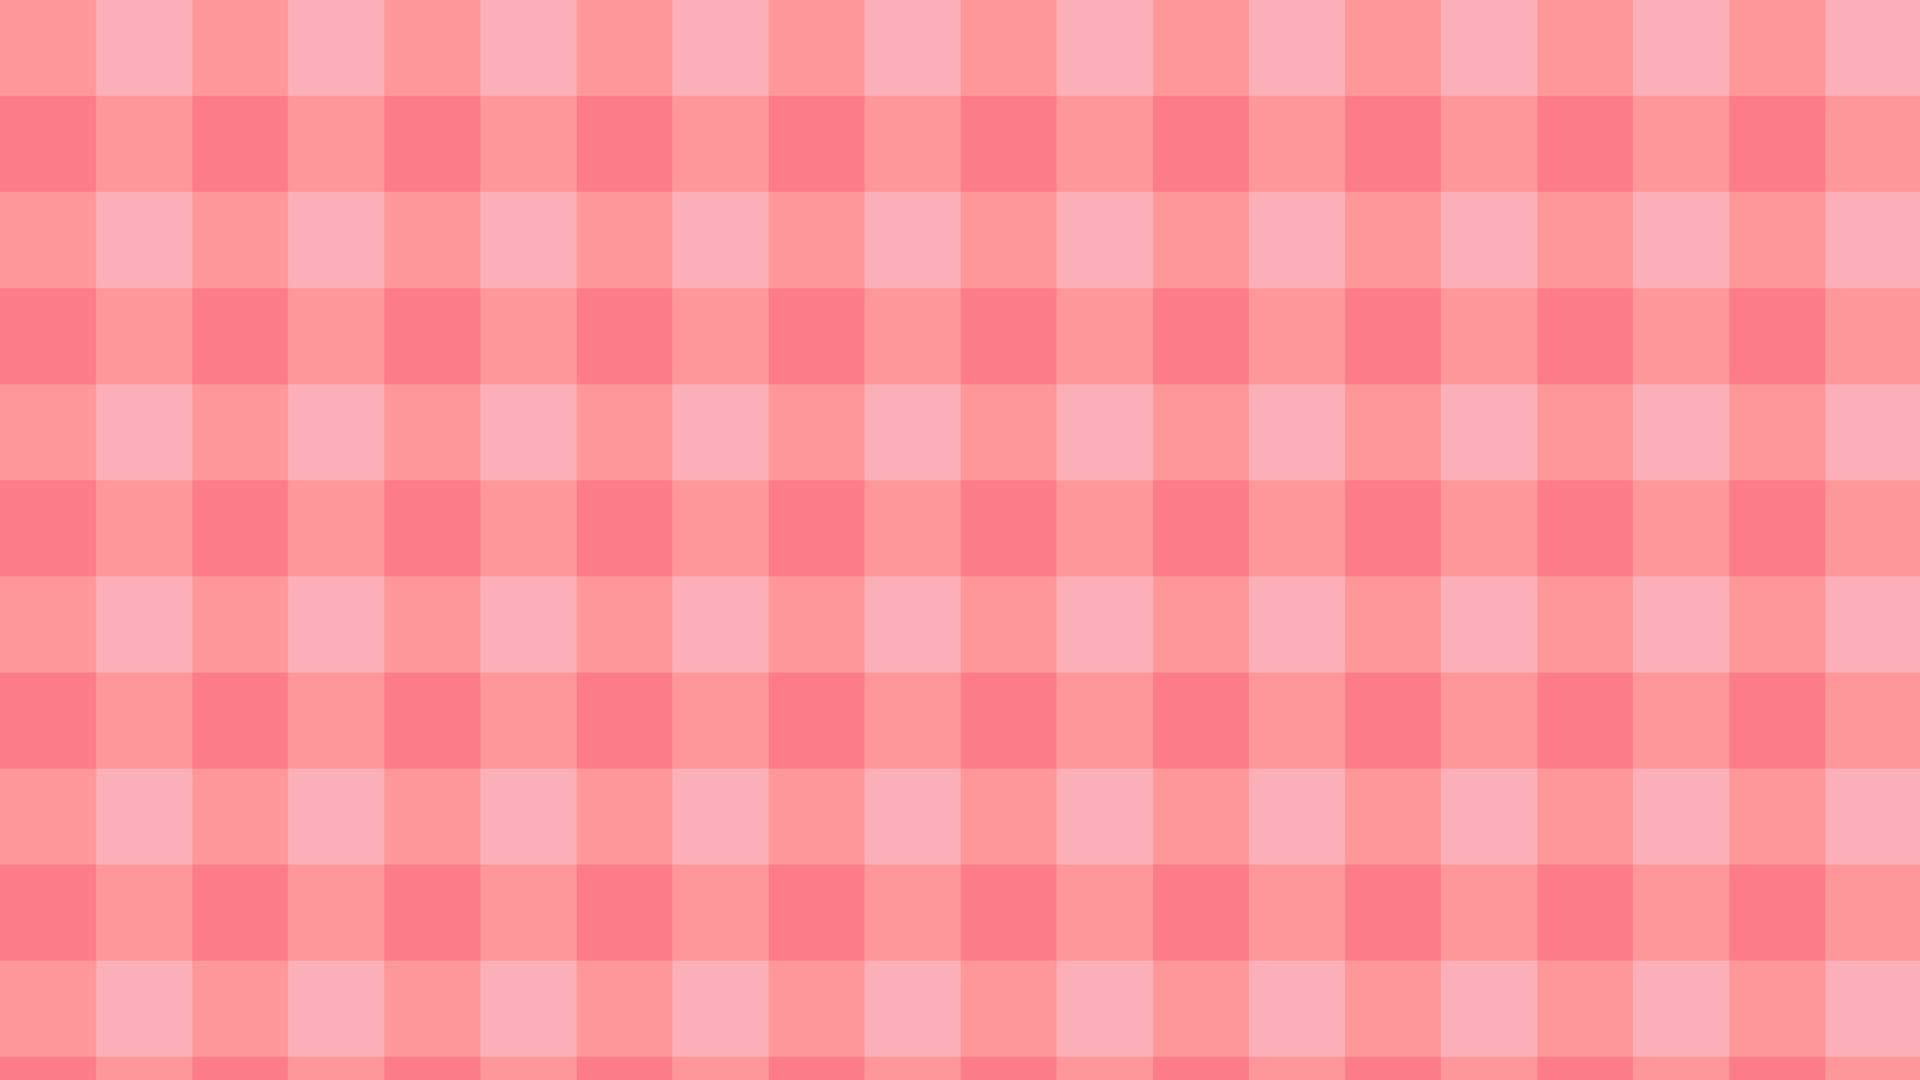 aesthetic pink and orange checkers, gingham, plaid, checkerboard wallpaper illustration, perfect for wallpaper, backdrop, postcard, background